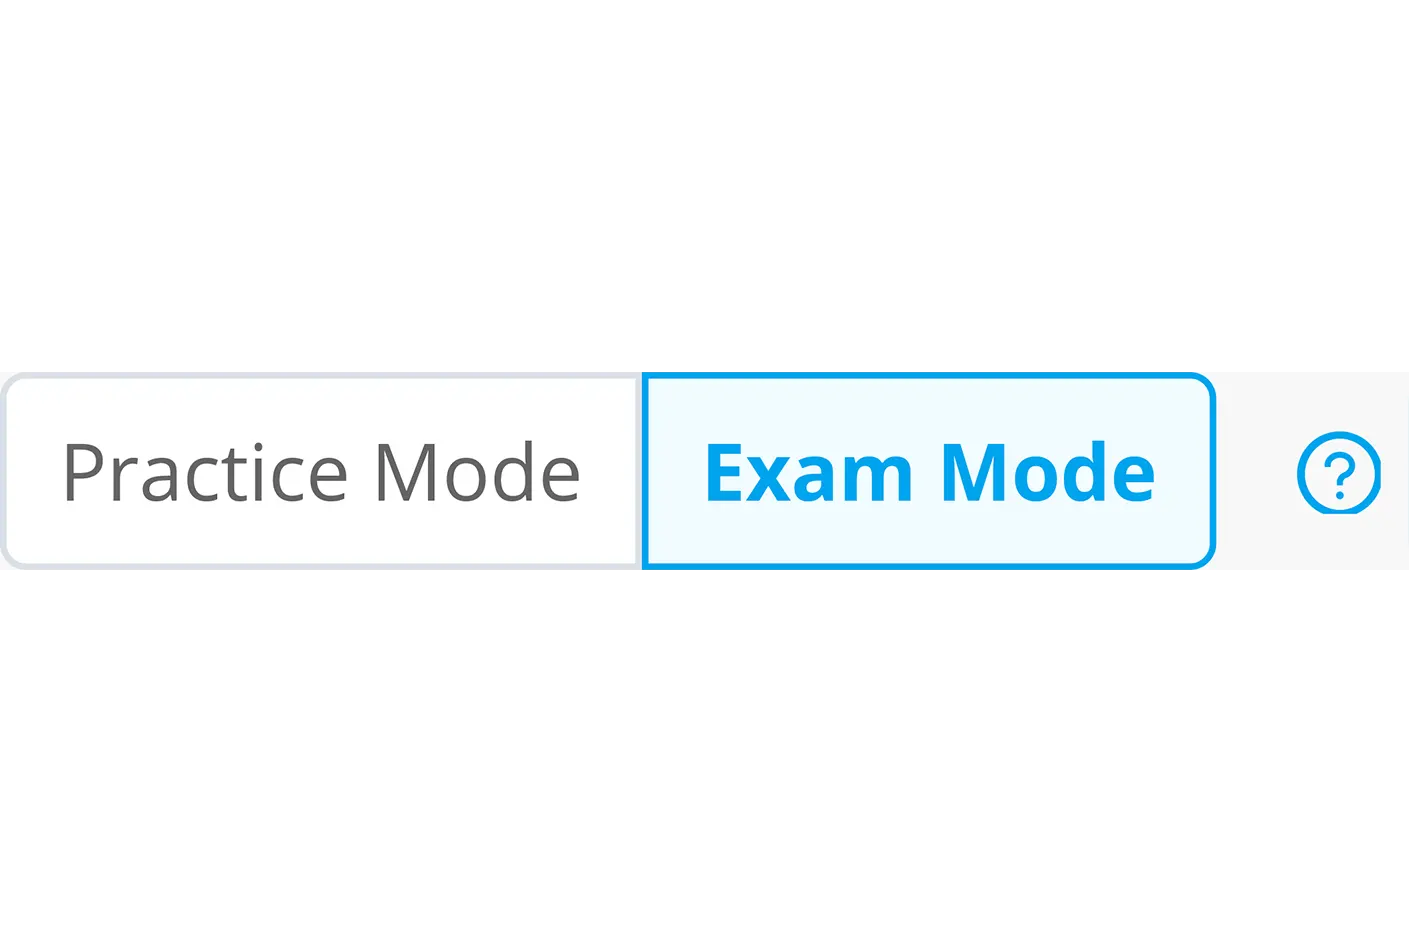 There is a screenshot of exam mode select for Job Test practice test